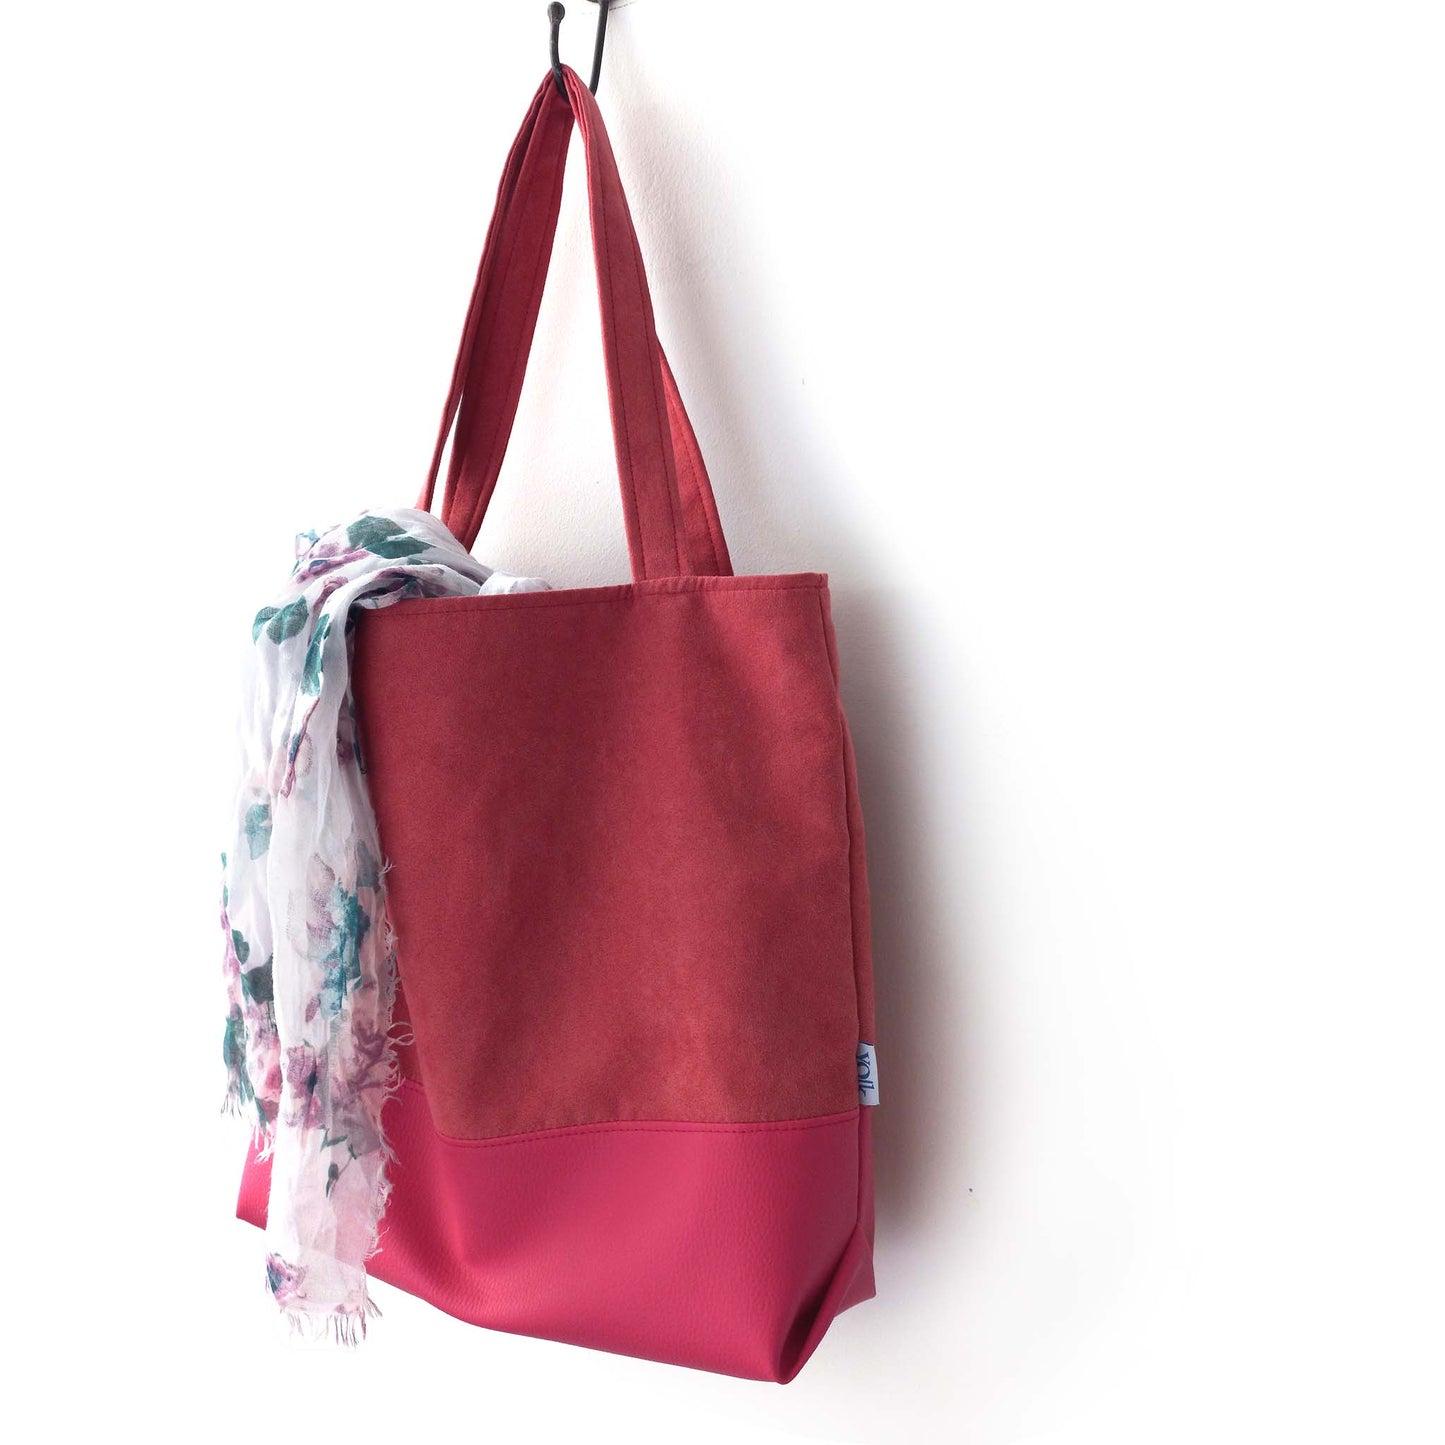 Red shopper bag with a scarf